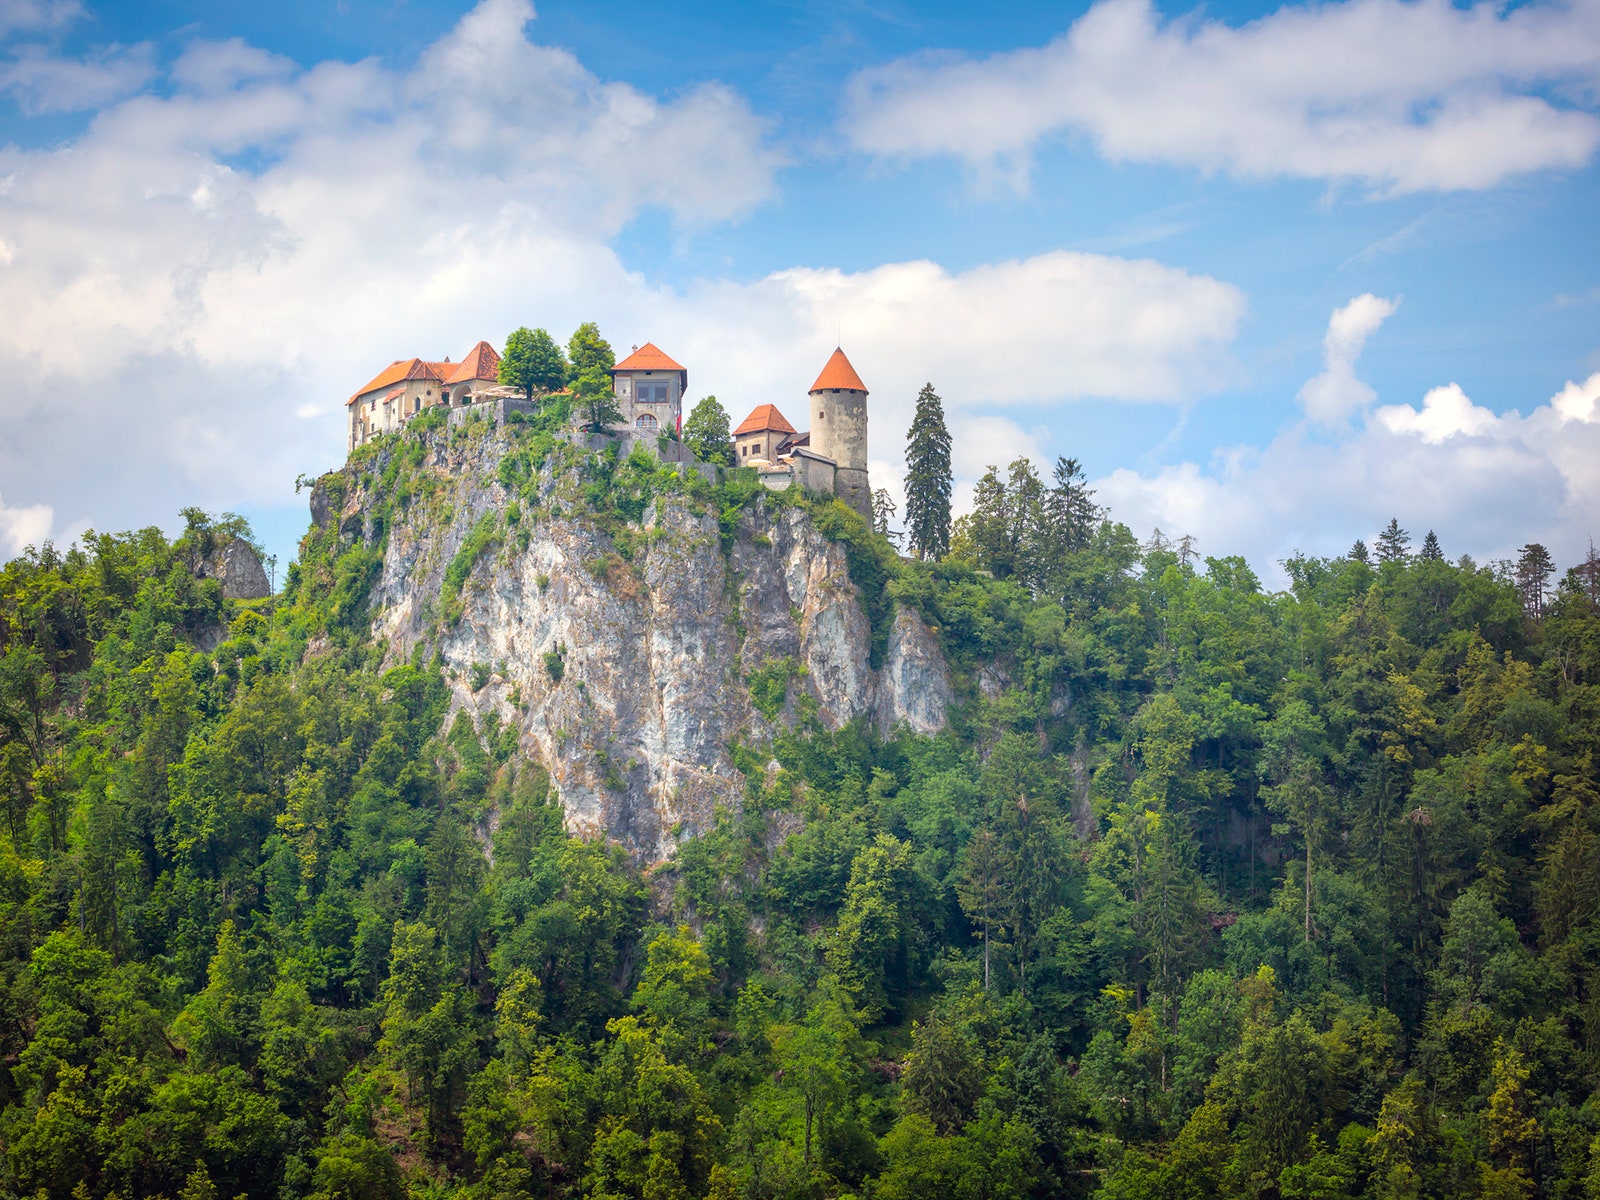 Here Are 24 Glorious Natural Attractions – Can You Match Them to Their Country? Slovenia